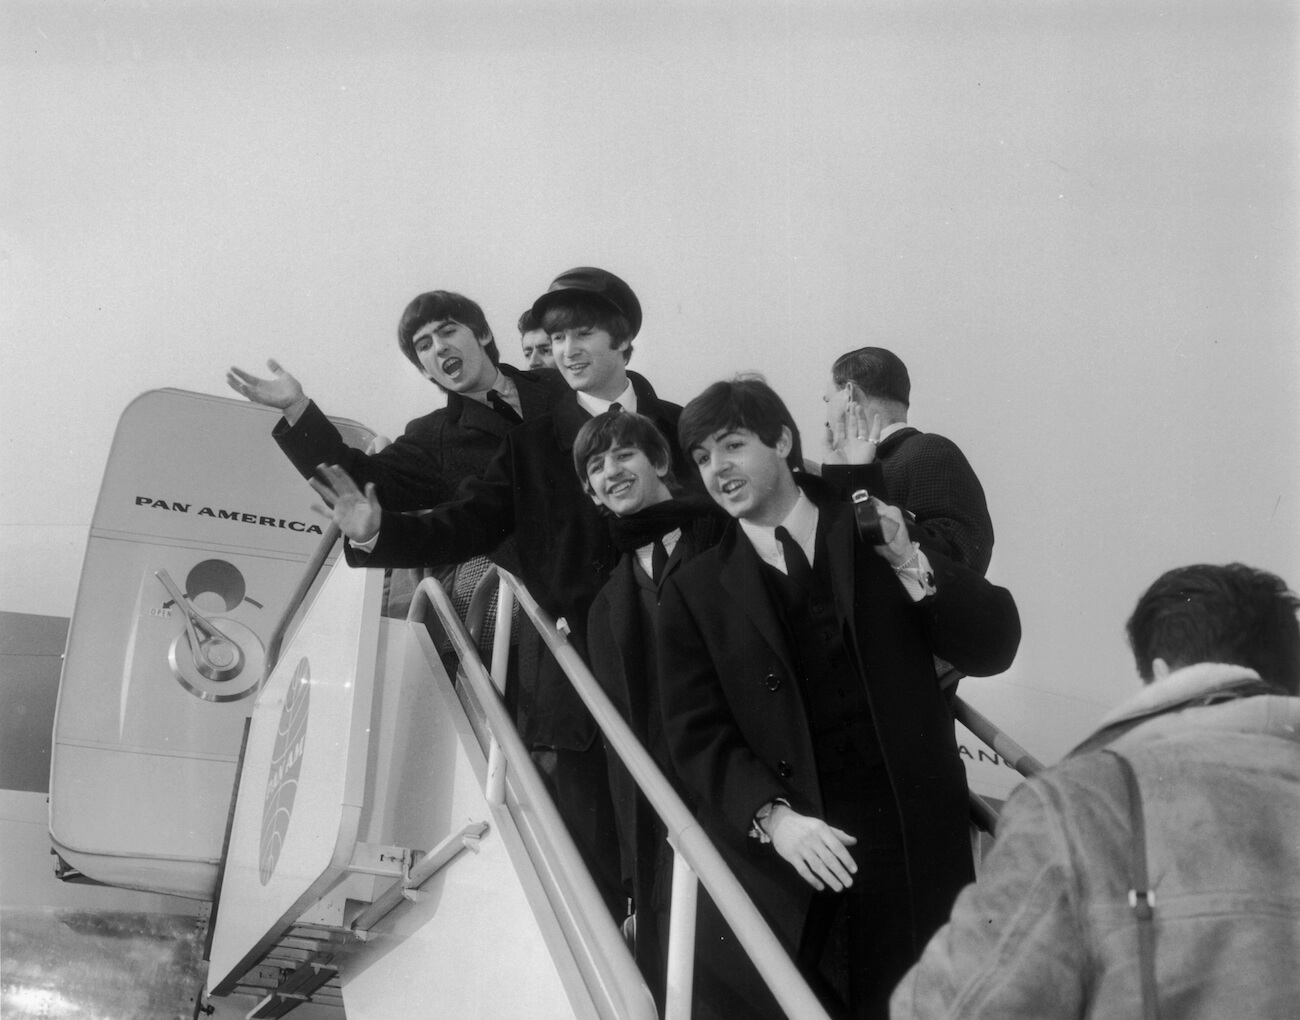 The Beatles leaving England for the U.S. in 1964.